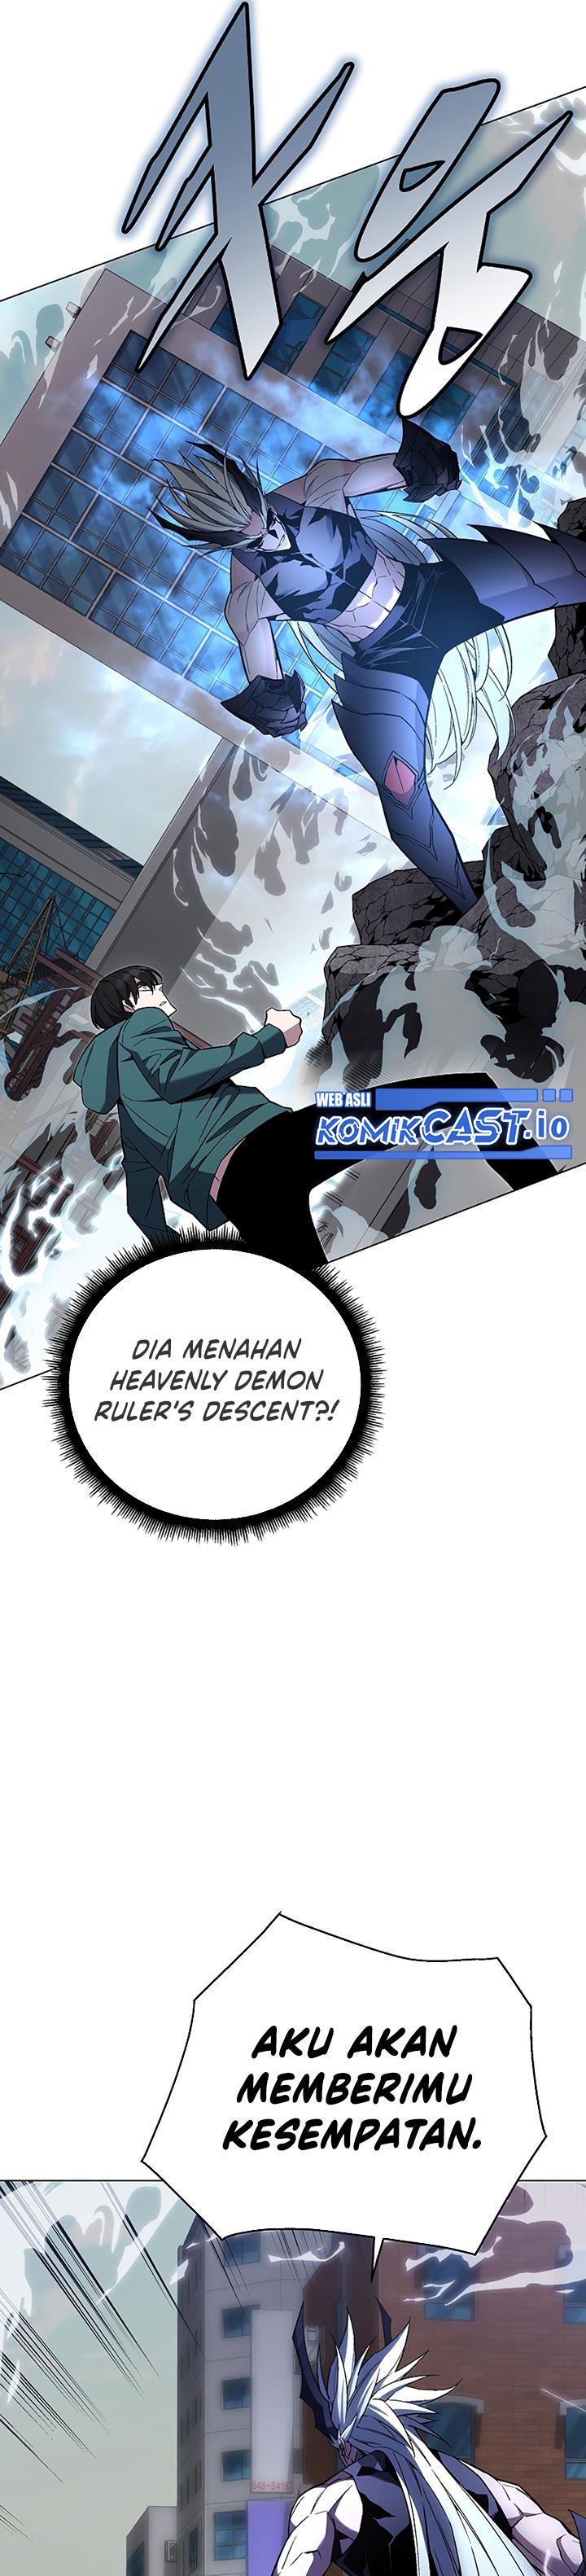 Heavenly Demon Instructor Chapter 102